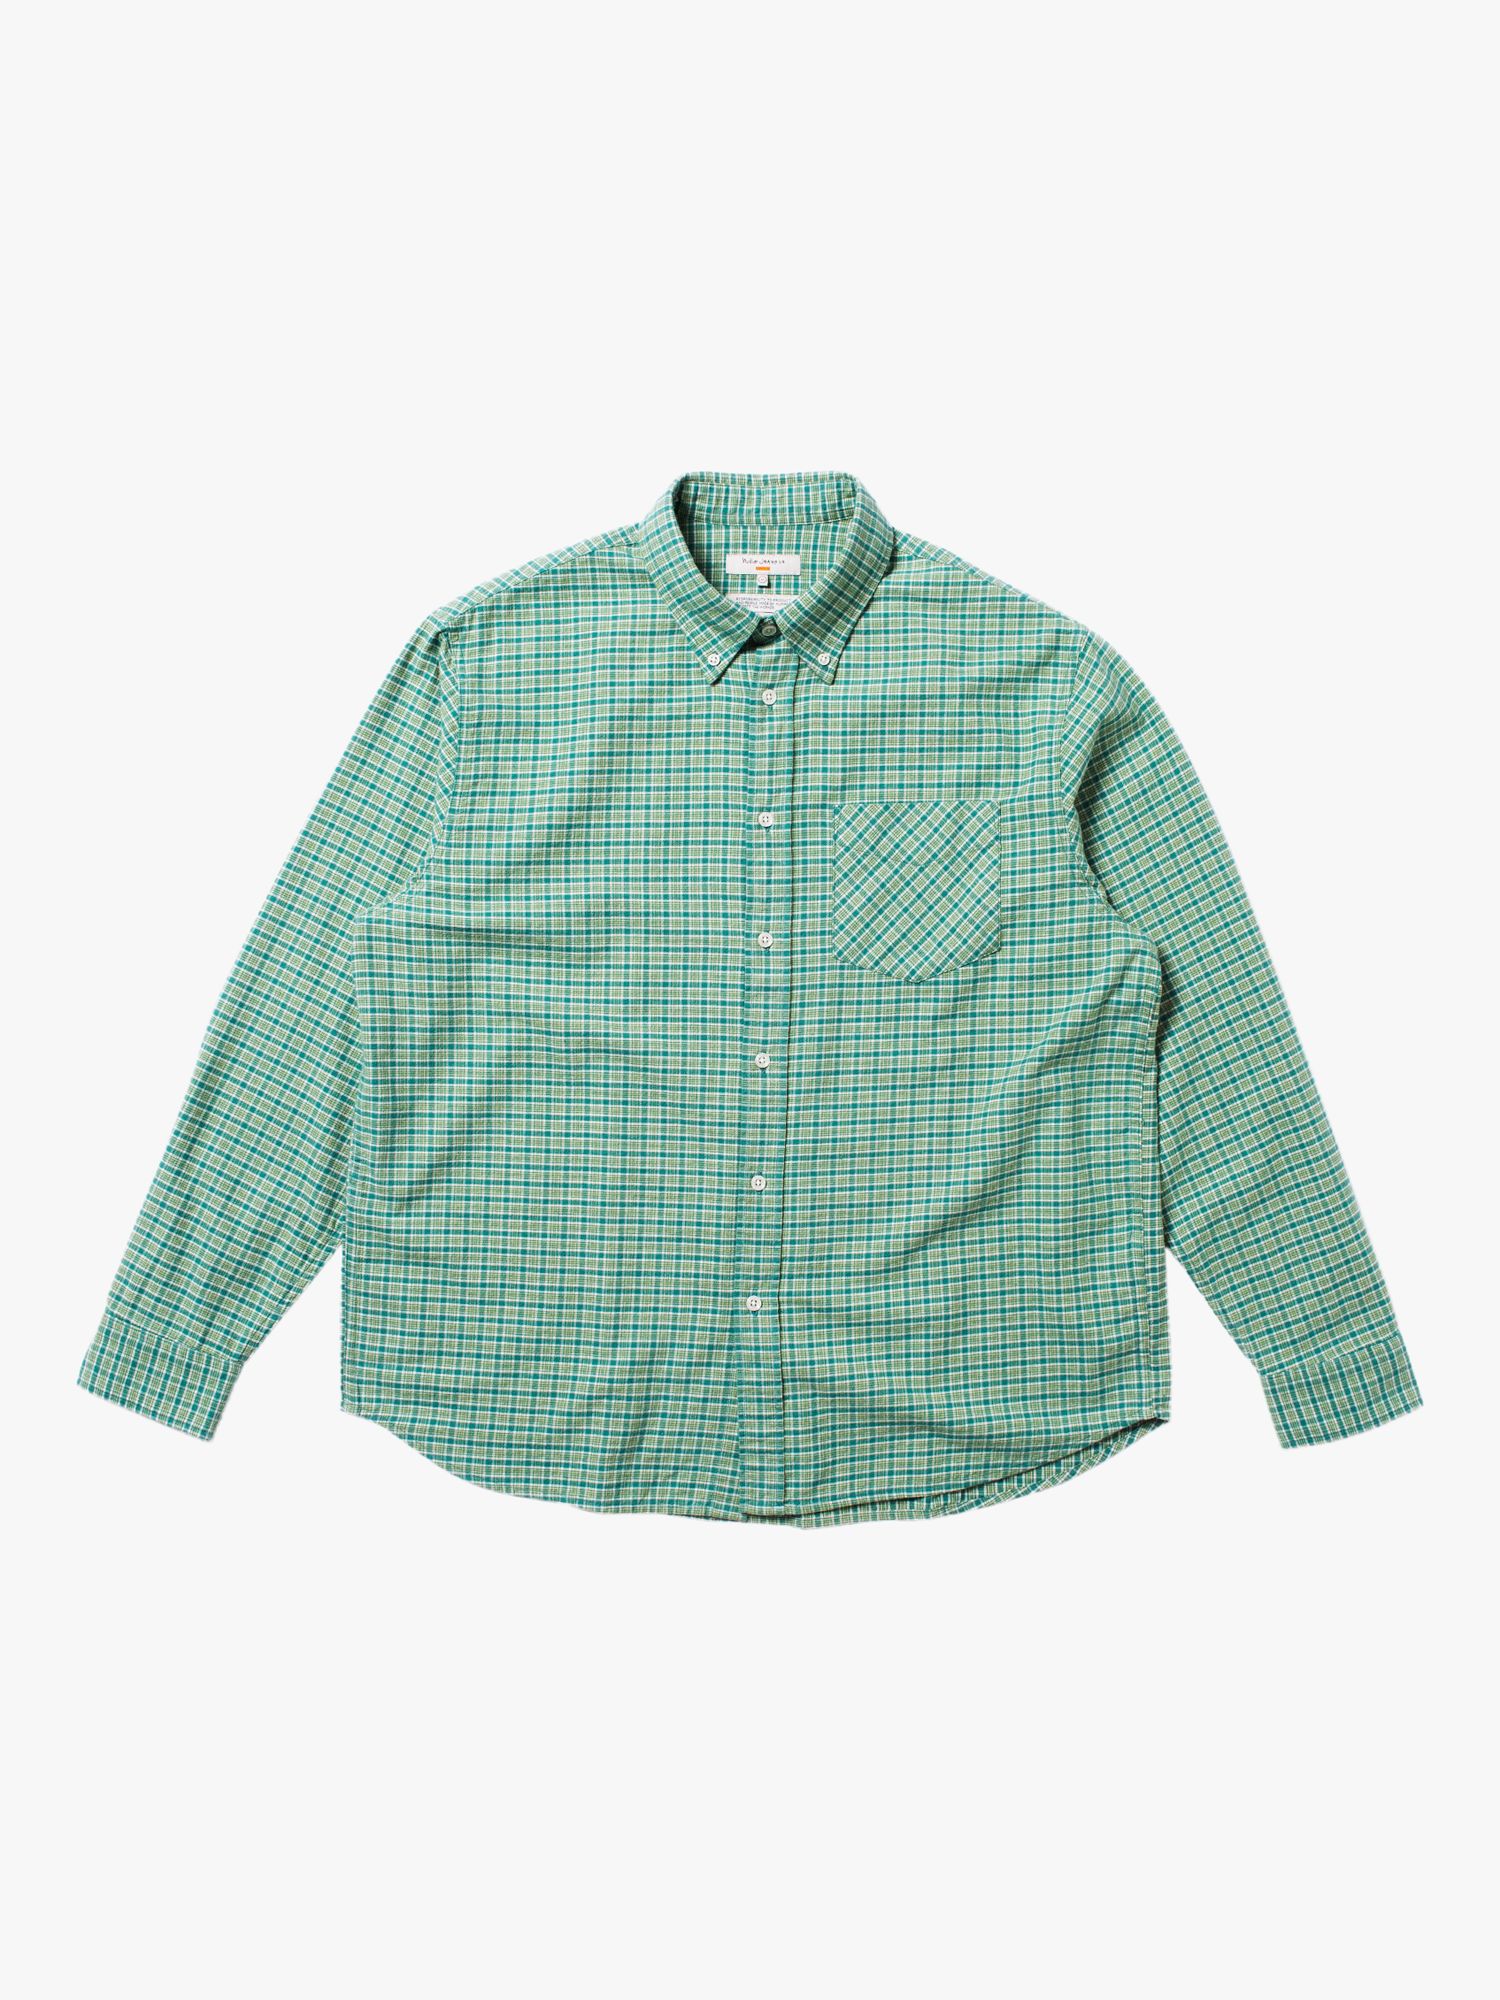 Nudie Jeans Flip Check Shirt, Green, S